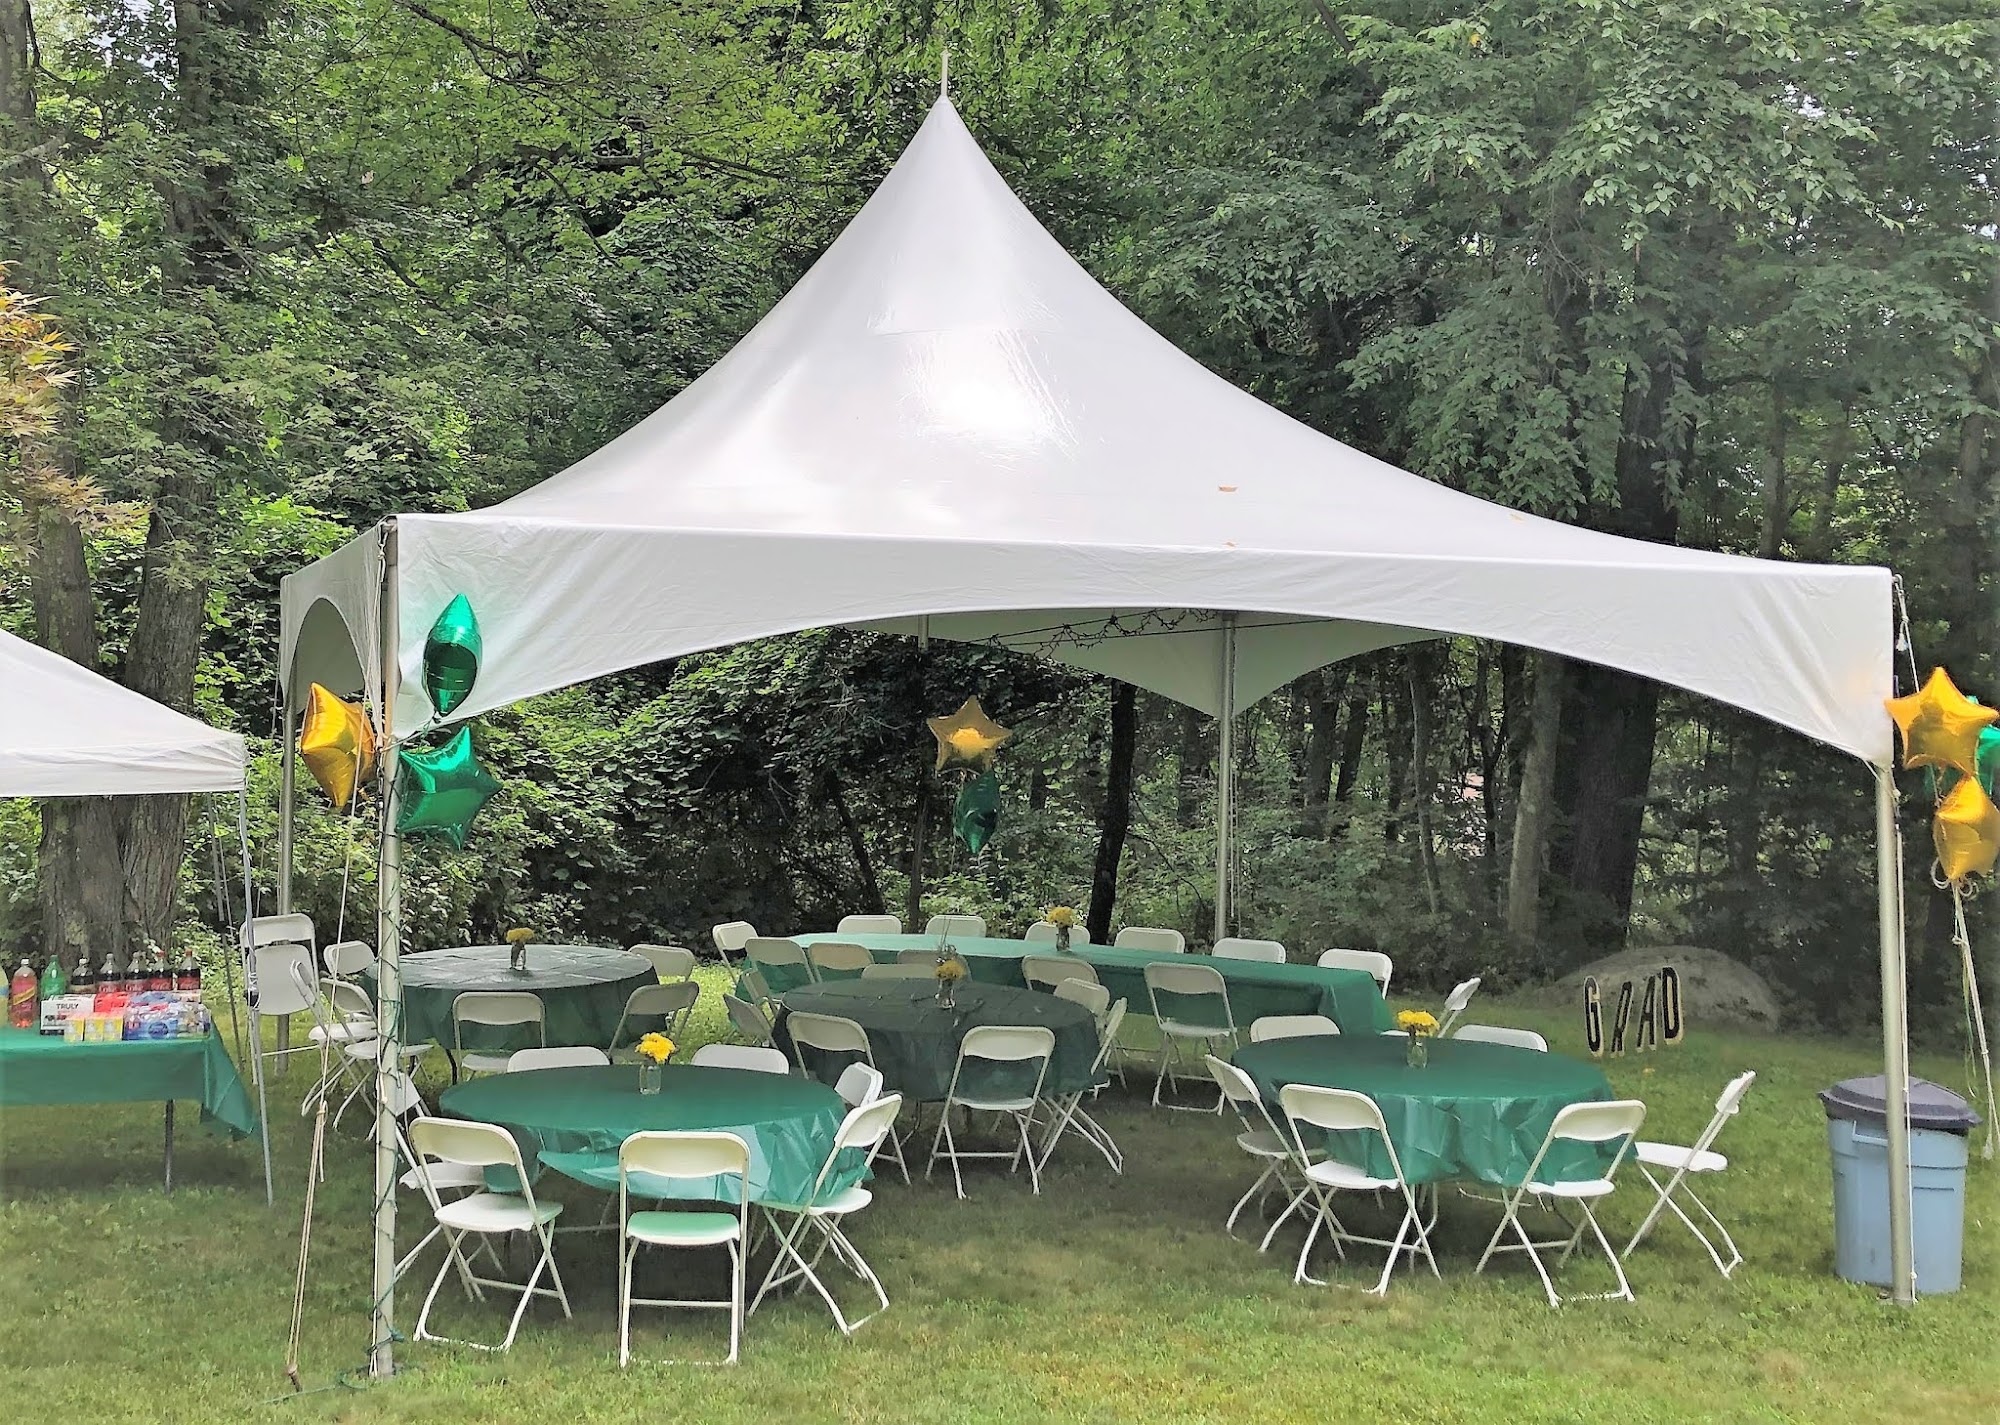 PartyTime Rentals 2575 State Rte 55, Poughquag New York 12570